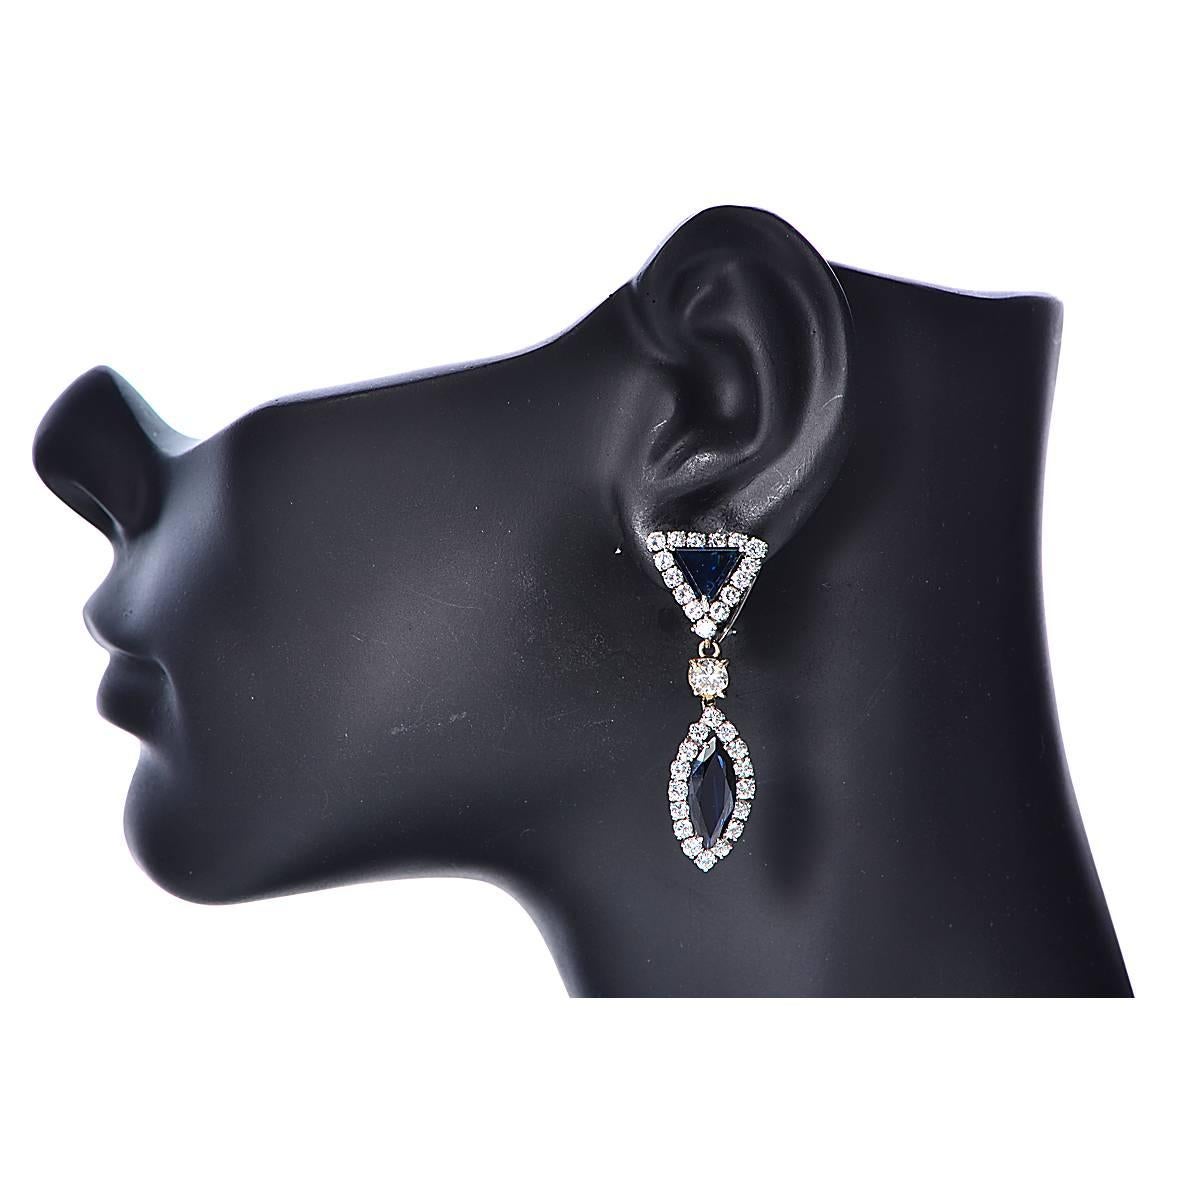 18 Karat White Gold Earrings Featuring 4 Sapphires Weighing Approximately 11.00 Carats Total Accented by 5.90 Carats of Round Brilliant Cut Diamonds, G Color, VS Clarity.

Weight: 16.63 grams

These Earrings are Accompanied by a Retail Appraisal